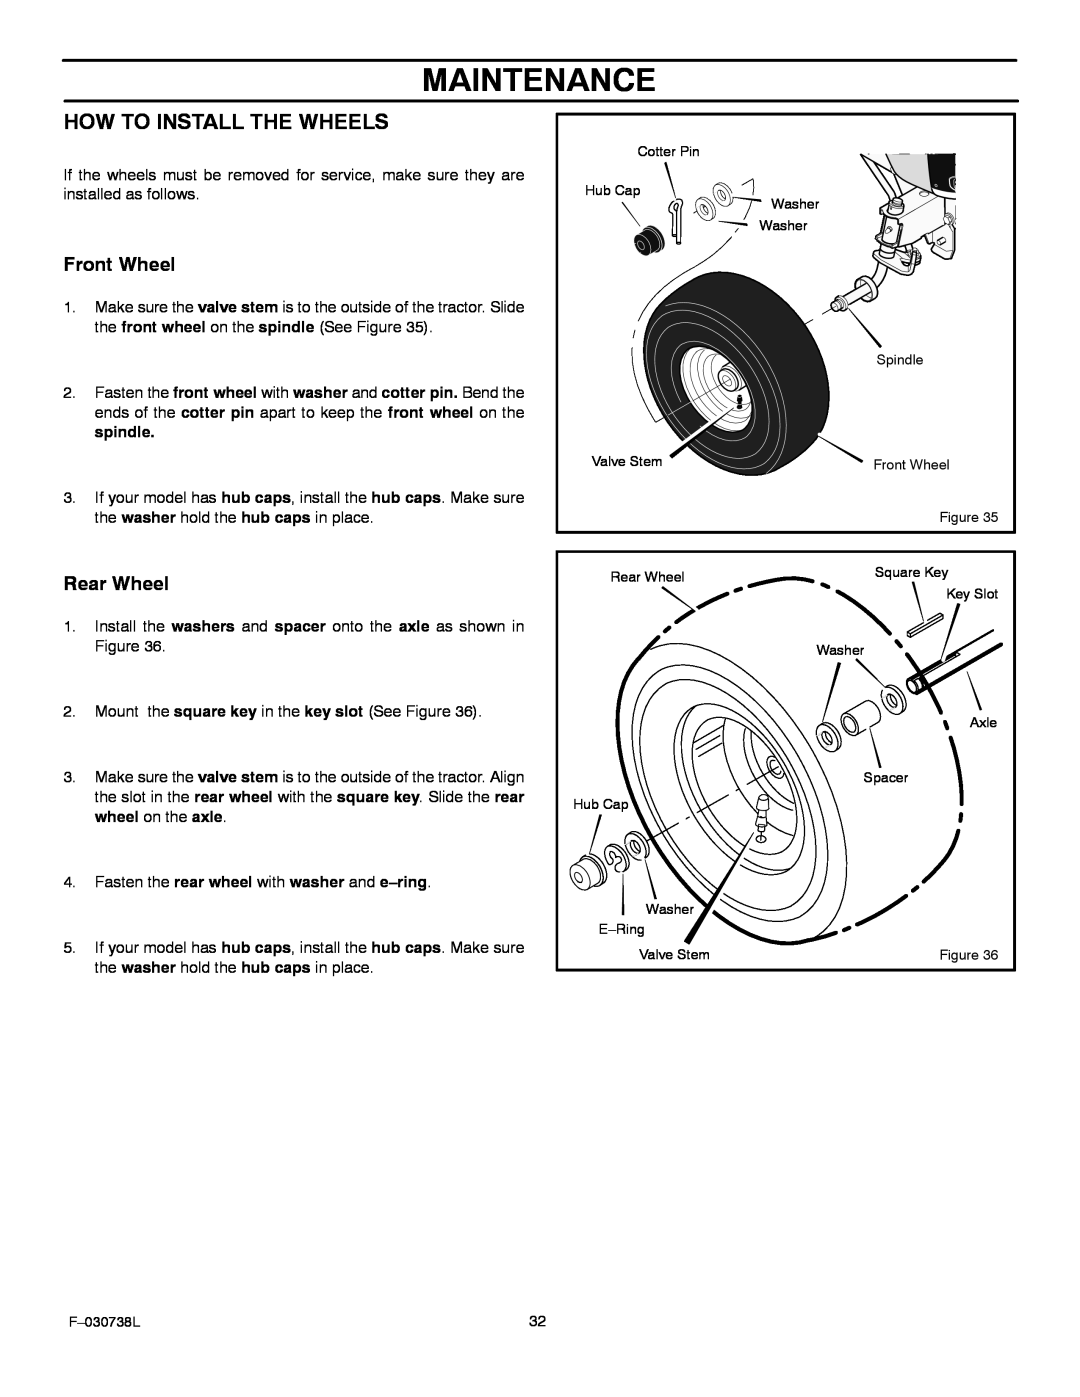 Murray 425603x99A manual Maintenance, How To Install The Wheels, Front Wheel, Rear Wheel 